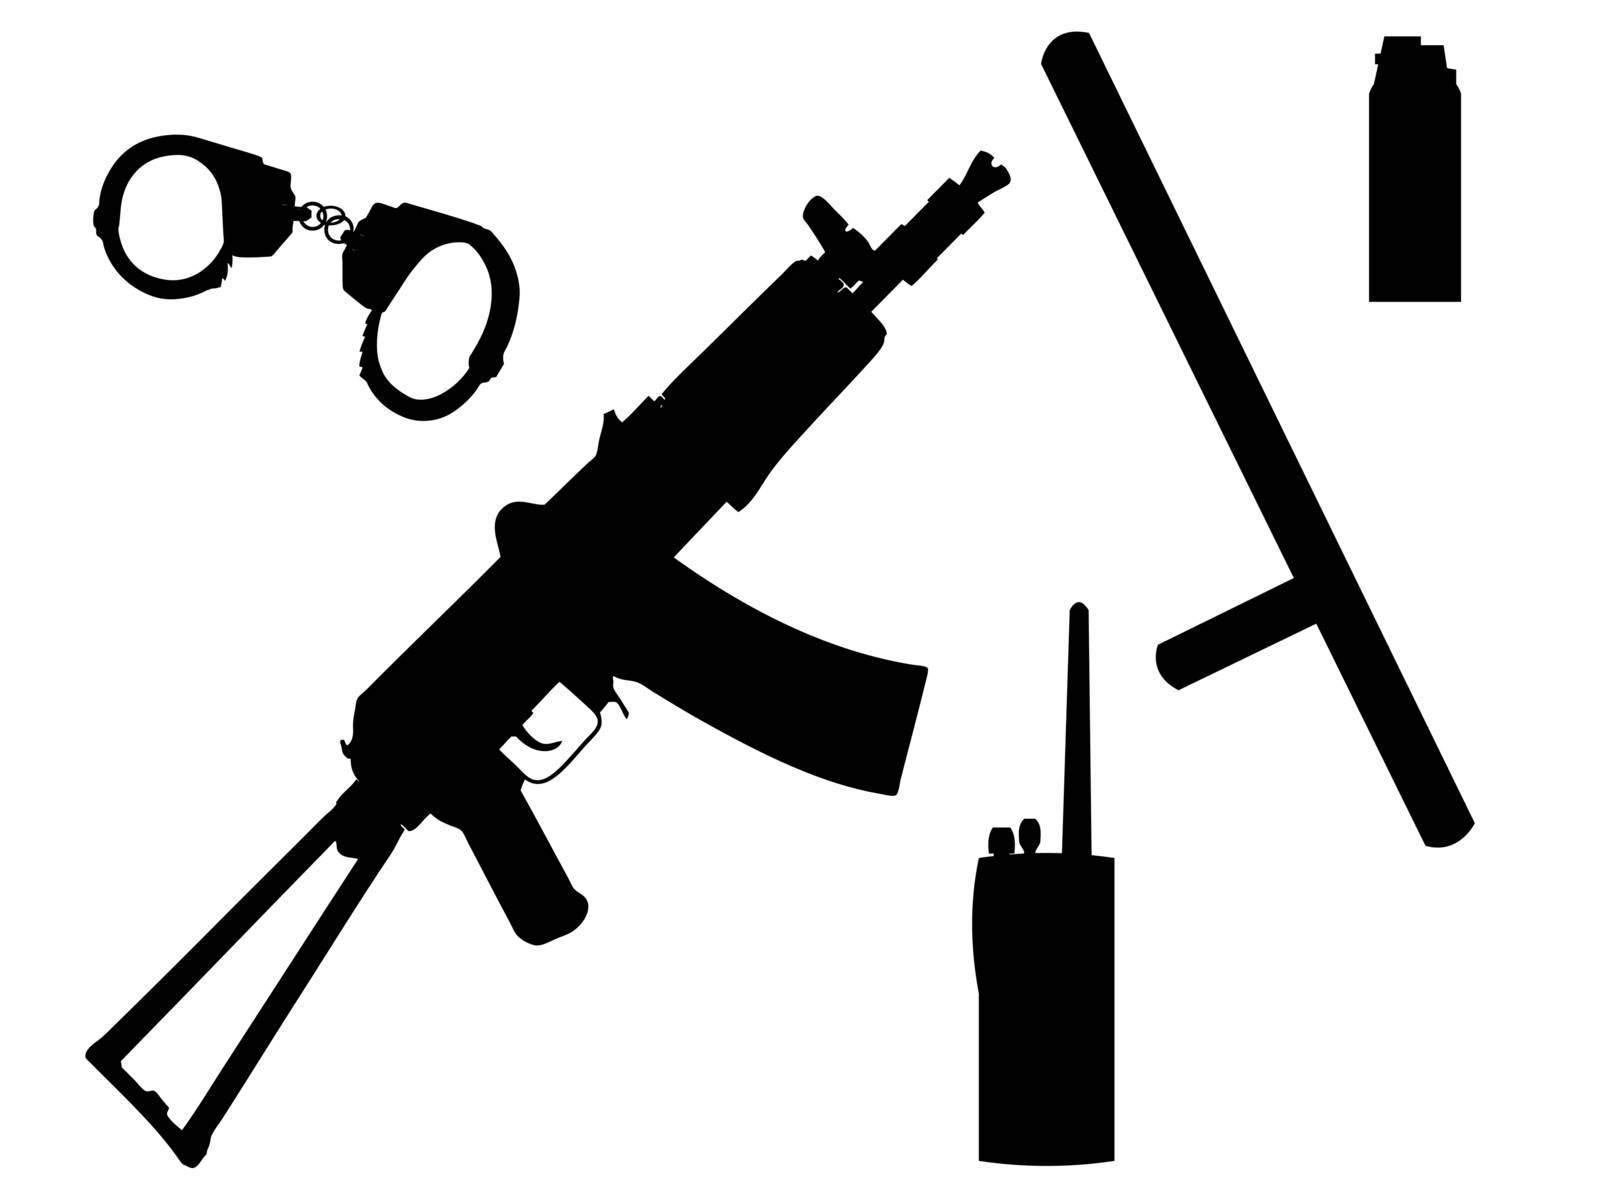 Equipment and arms of the policeman in a vector